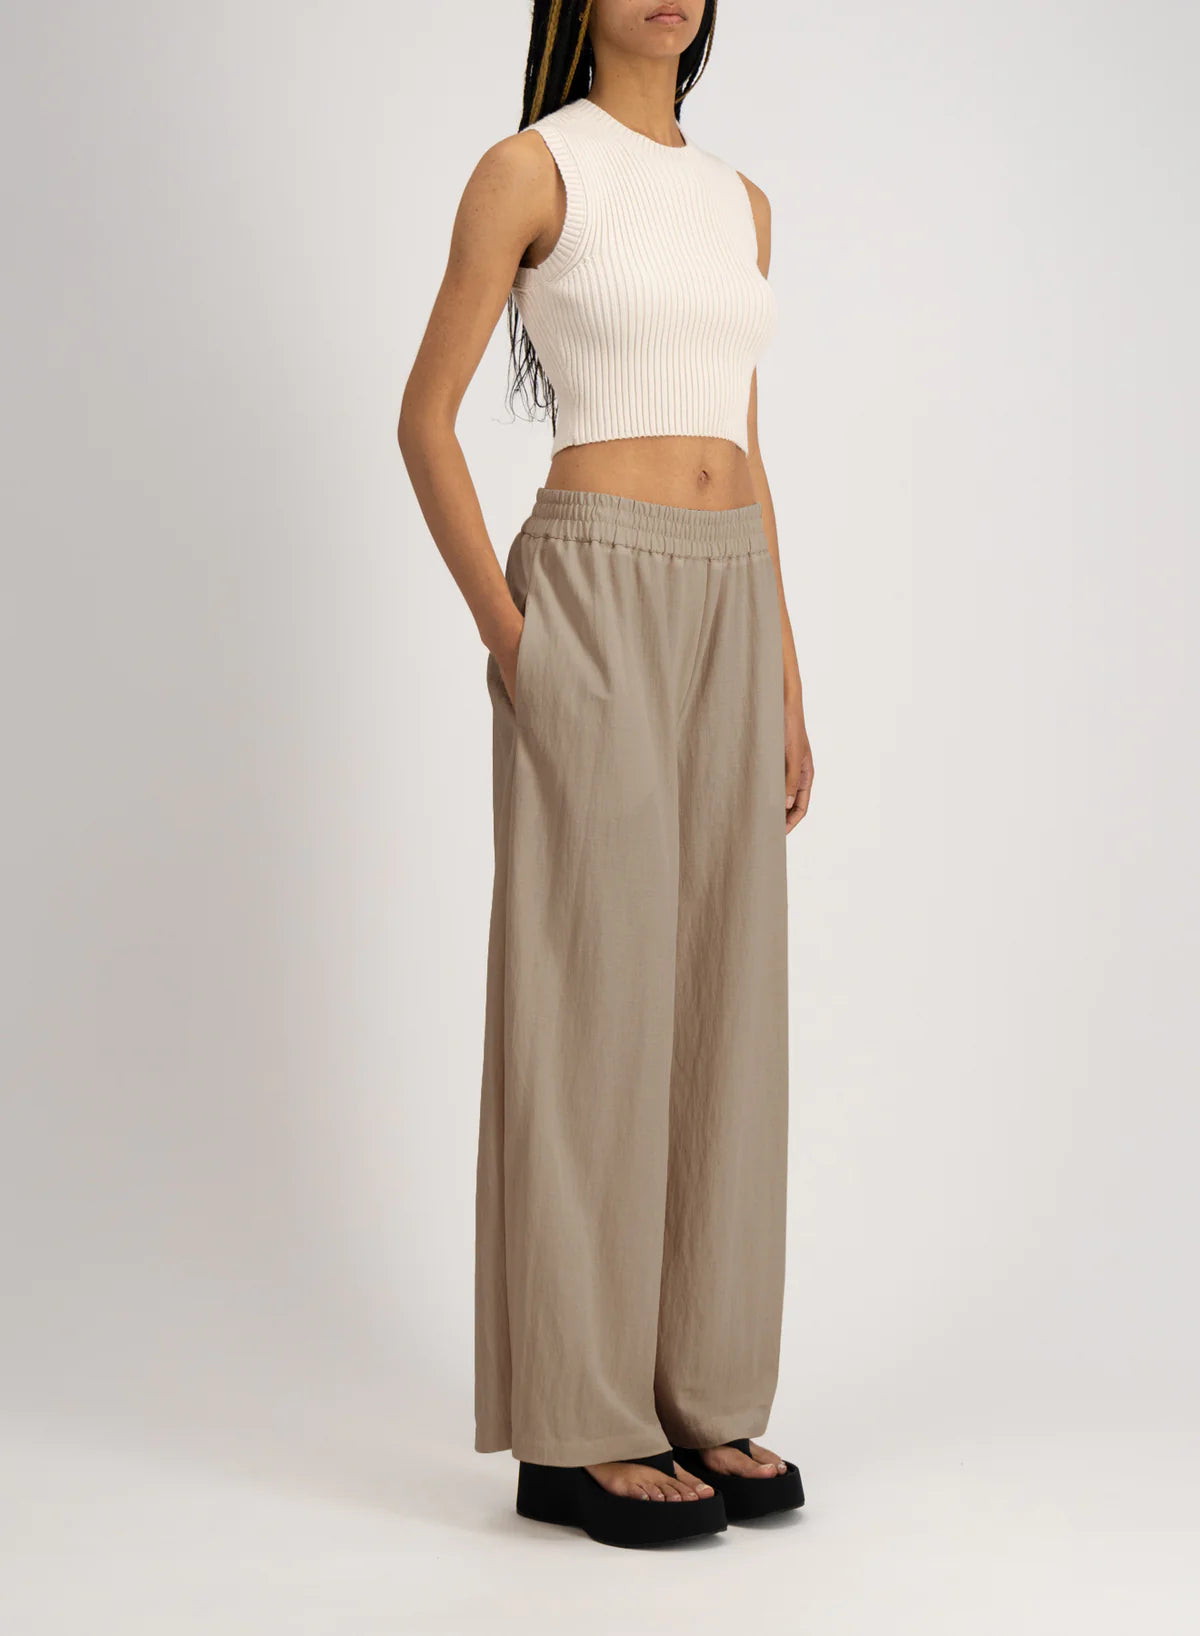 Palazzo jogging trousers rayon, beige